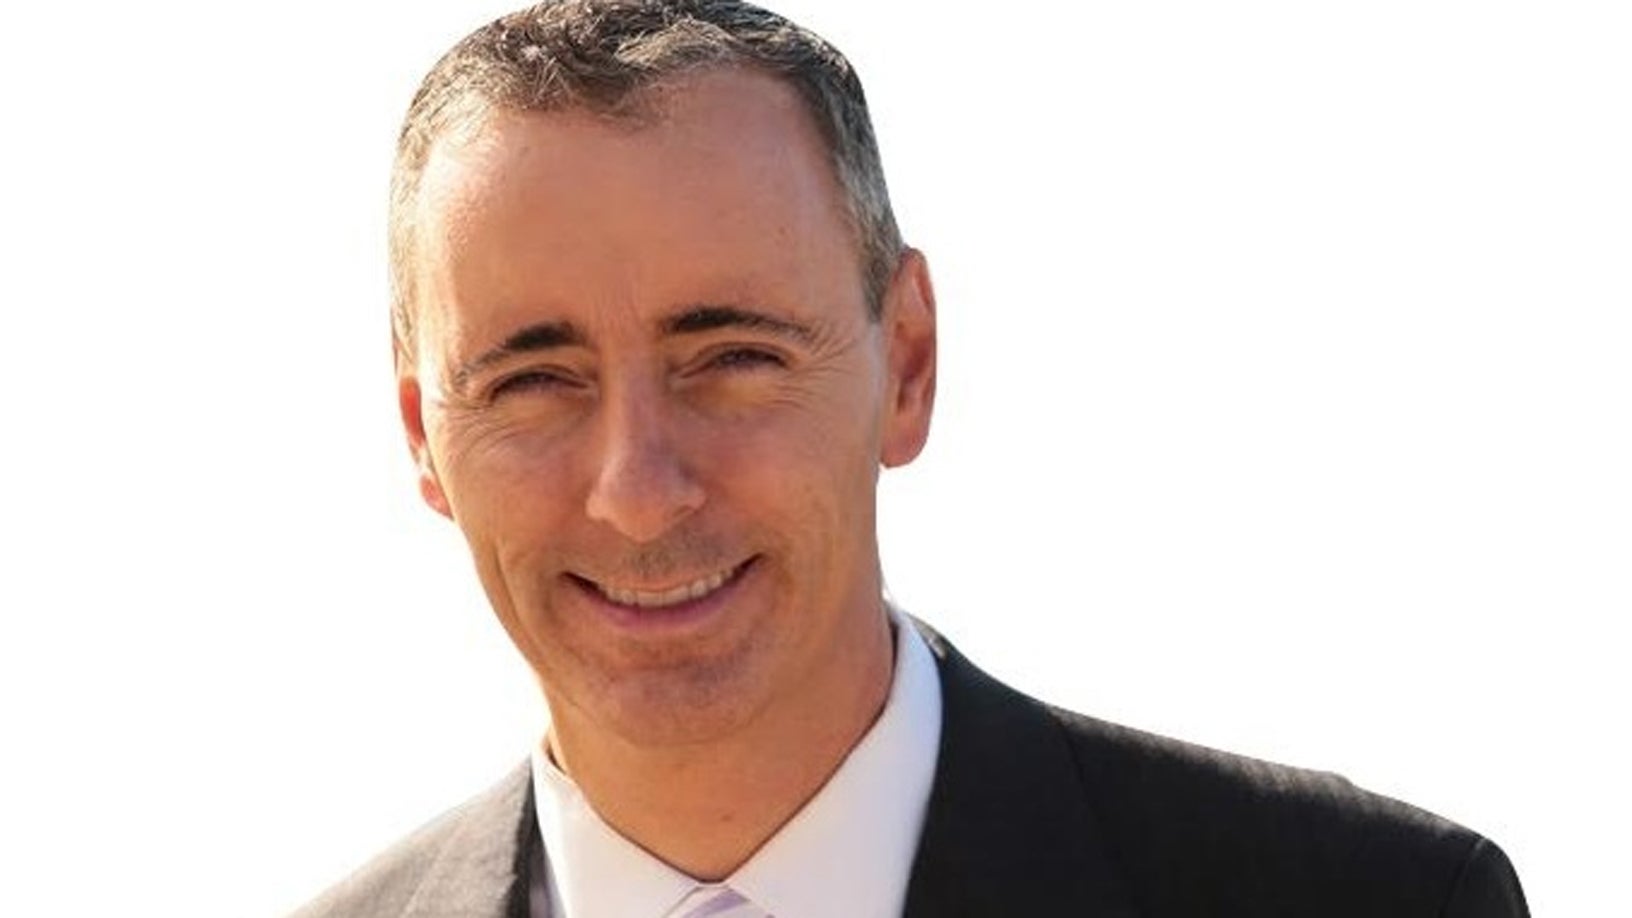  Brian Fitzpatrick is making a late run for his brother's congressional seat. (Image via Montgomery County Democracy for America) 